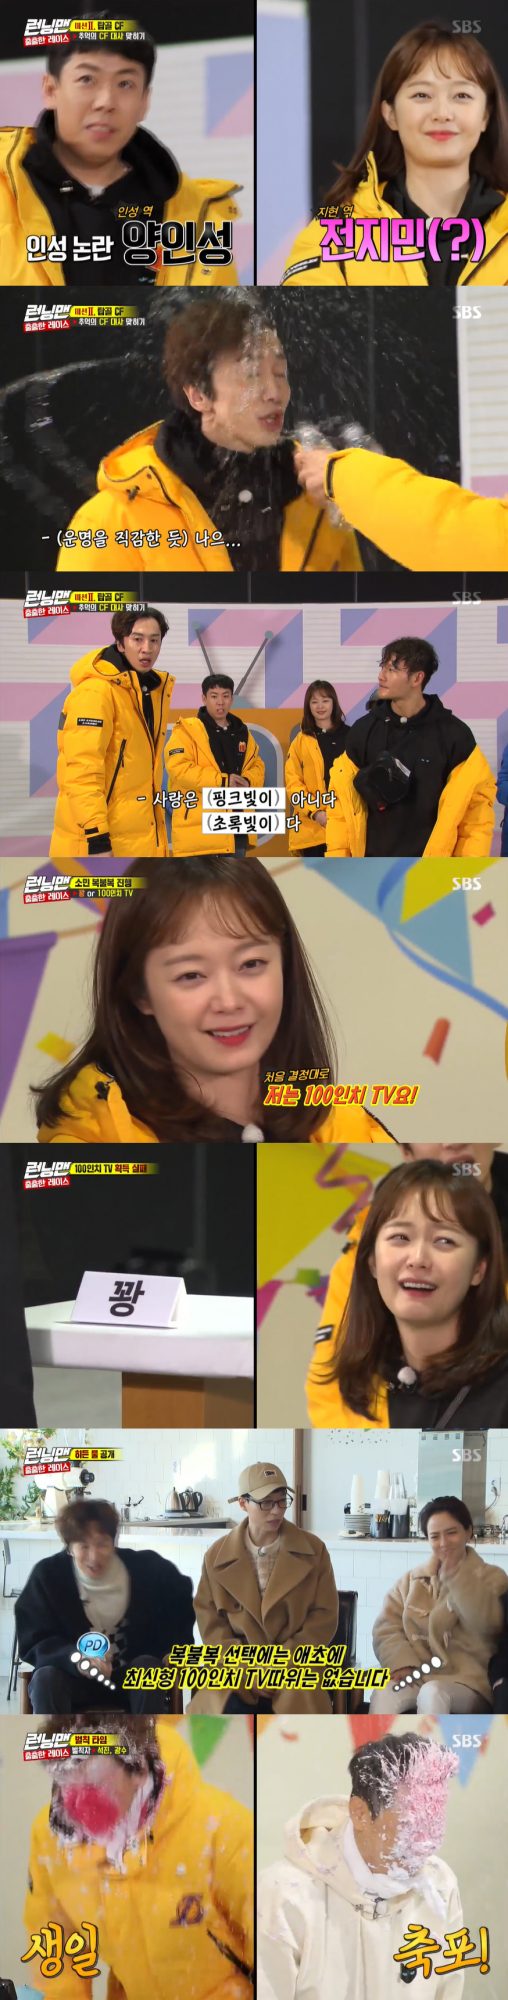 Jeon So-min won SBS Running Man but failed to win the product because he was greedy.Lee Kwang-soo, Ji Suk-jin carried out fresh cream bomb penaltiesOn the 9th broadcast Running Man, Race was held in commemoration of Ji Suk-jin birth & Jeon So-min publishing.Before the full-scale race, we talked about the recent situation of the members.Yoo Jae-Suk told Yang Se-chan that Yang Se-hyeong and YouTube were classified as Kids channels.Kim Jong-kook said, At first glance, the officials saw that this was a childrens broadcast.Haha also said, The computer is handling it, but it was classified as a Kids channel and the comment function was stopped. Yang Se-chan laughed, saying, The comment is blocked.He also wondered if the Yang Se-chan - Yang Se-hyeong brothers were classified as Kids channels when they played billiards and soo, Lee Kwang-soo said.Yang Se-chan also laughed, absurd.The members then asked the production team in advance to take out meaningful items and discarding items they brought.Ji Suk-jin said, I have been reminded of 10 years after receiving the text of the production team. It felt good that I could present it for our members.So I went to the department store with my wife. When I saw the item, I remembered Lee Kwang-soo.Thats it! Kim Jong-kook said, but this is not the way it is. Im not going to do it.The volume should go in more.Yang Se-chan said, Is not it that you saw the movie Taja - One Eyed Jack in this movie? Lee Kwang-soo made a backward exposure.Lee Kwang-soo said, I am grateful to my sister-in-law anyway.On the day, Race was divided into Ji Suk-jin and Jeon So-min, who took charge of the team.Each team can take the product by choosing a meaningful gift or a 100-inch TV Bokbulbok Show brought by the members through the confrontation.If you choose a 100-inch TV and can not take it, you can change it to a gift certificate of 8 million won.Ji Suk-jin teamed up with Song Ji-hyo, Yoo Jae-Suk and Haha, while Jeon So-min teamed up with Kim Jong-kook, Yang Se-chan and Lee Kwang-soo.The first mission was to find food with a longer name.The Ji Suk-jin team went to Itaewon for 22 letters of food, and the Jeon So-min team headed to Yeonnam-dong for 18 letters of food.Arriving at a restaurant in Itaewon, the Ji Suk-jin team found the 22-letter menu, which was originally intended to eat, sold out due to material exhaustion.Fortunately, however, I found another menu with 22 letters: Yoo Jae-Suk suggested that the passer-by should choose a number and decide that the number person eats food.The pig relief roast cooked with the Soubid technique was available to Yoo Jae-Suk and also acquired a product badge.Arriving at the restaurant, the Jeon So-min team found 27-letter menus more than 18 letters; the Jeon So-min team ate food by Jeon So-min.At that time, the Ji Suk-jin team heard that the Jeon So-min team had found a 27-letter menu; while searching, Haha found 45-letter food.The Jeon So-min team also found 31 letters of food in another store.The Ji Suk-jin team visited a meat restaurant run by Haha and Kim Jong-kook. The restaurant had a friend of Hahas.The walls and menus of the restaurant featured a precipitous, 47-letter bibim cold noodle menu, even with the letters not the 45, which Haha had said, but the 47.The production team said that if it explains the difference between ordinary bibim cold noodles, it will admit it.The menu tasting was done by Song Ji-hyo, and the production team acknowledged Song Ji-hyos product badge after the discussion, but failed the mission.If we admit this, well make a menu for that team, the team said. The first round match was won by the Jeon So-min team, who found 31-letter food.The second round was to be met with a memorable CF ambassador. The problem was a drink CF starring Jun Ji-hyun and Jo In-sung, Shi Chonggui.It was a movie-like CF about the situation where Jun Ji-hyun was caught dating another man over his boyfriend Jo In-sung.Song Ji-hyo and Ji Suk-jin succeeded in getting the line Love feeds you? Lie things do not deserve to love!The second problem was a coffee drink CF that created the famous ambassador, I think I am going to be an elderly person.Haha and Song Ji-hyo were quoted as sick and look more beautiful. In the ensuing problems, the Jeon So-min team tied two to two in a row.The last problem was Shi Chonggui, a plum drink CF starring Jang Na-ra and Kim Jae-won.Jeon So-min, who was immersed in the acting of a lover with Yang Se-chan, laughed at Yang Se-chan by spraying water on his face like CF.Lee Kwang-soo was angry at Kim Jong-kook, who came out as an opponent, by spraying bottled water.In the next challenge, Kim Jong-kook changed his role and sprayed Lee Kwang-soo with water on his face, but they said, Love is not pink.Green. The final result was 3-2, and the team won.The members put one badge on the product and solved the bonus problem. The problem that Shi Chonggui was CF with Han Seok-gyu and Shim Eun-ha.The final result was that Jeon So-min took the opportunity to get the product.Instead of sharing gifts with members, Jeon So-min chose the 100-inch TV Bokbulbok Show worth 8 million won.Jeon So-min picked the No. 1 at the Bokbulbok Show but was blue.Jeon So-min had only gotten a U.S. navigation 10 years ago, which Ji Suk-jin had brought to the thing to throw away.But there was a fact in this race that Ji Suk-jin and Jeon So-min did not know.There was no newer 100-inch TV in the first place in the Bokbulbok Show Choices.Other members knew in advance that if they were greedy and Choices TV, they would take nothing. Im sorry, said Jeon So-min.I will live nicely. Lee Kwang-soo and Ji Suk-jin were also punished for fresh cream bombs.